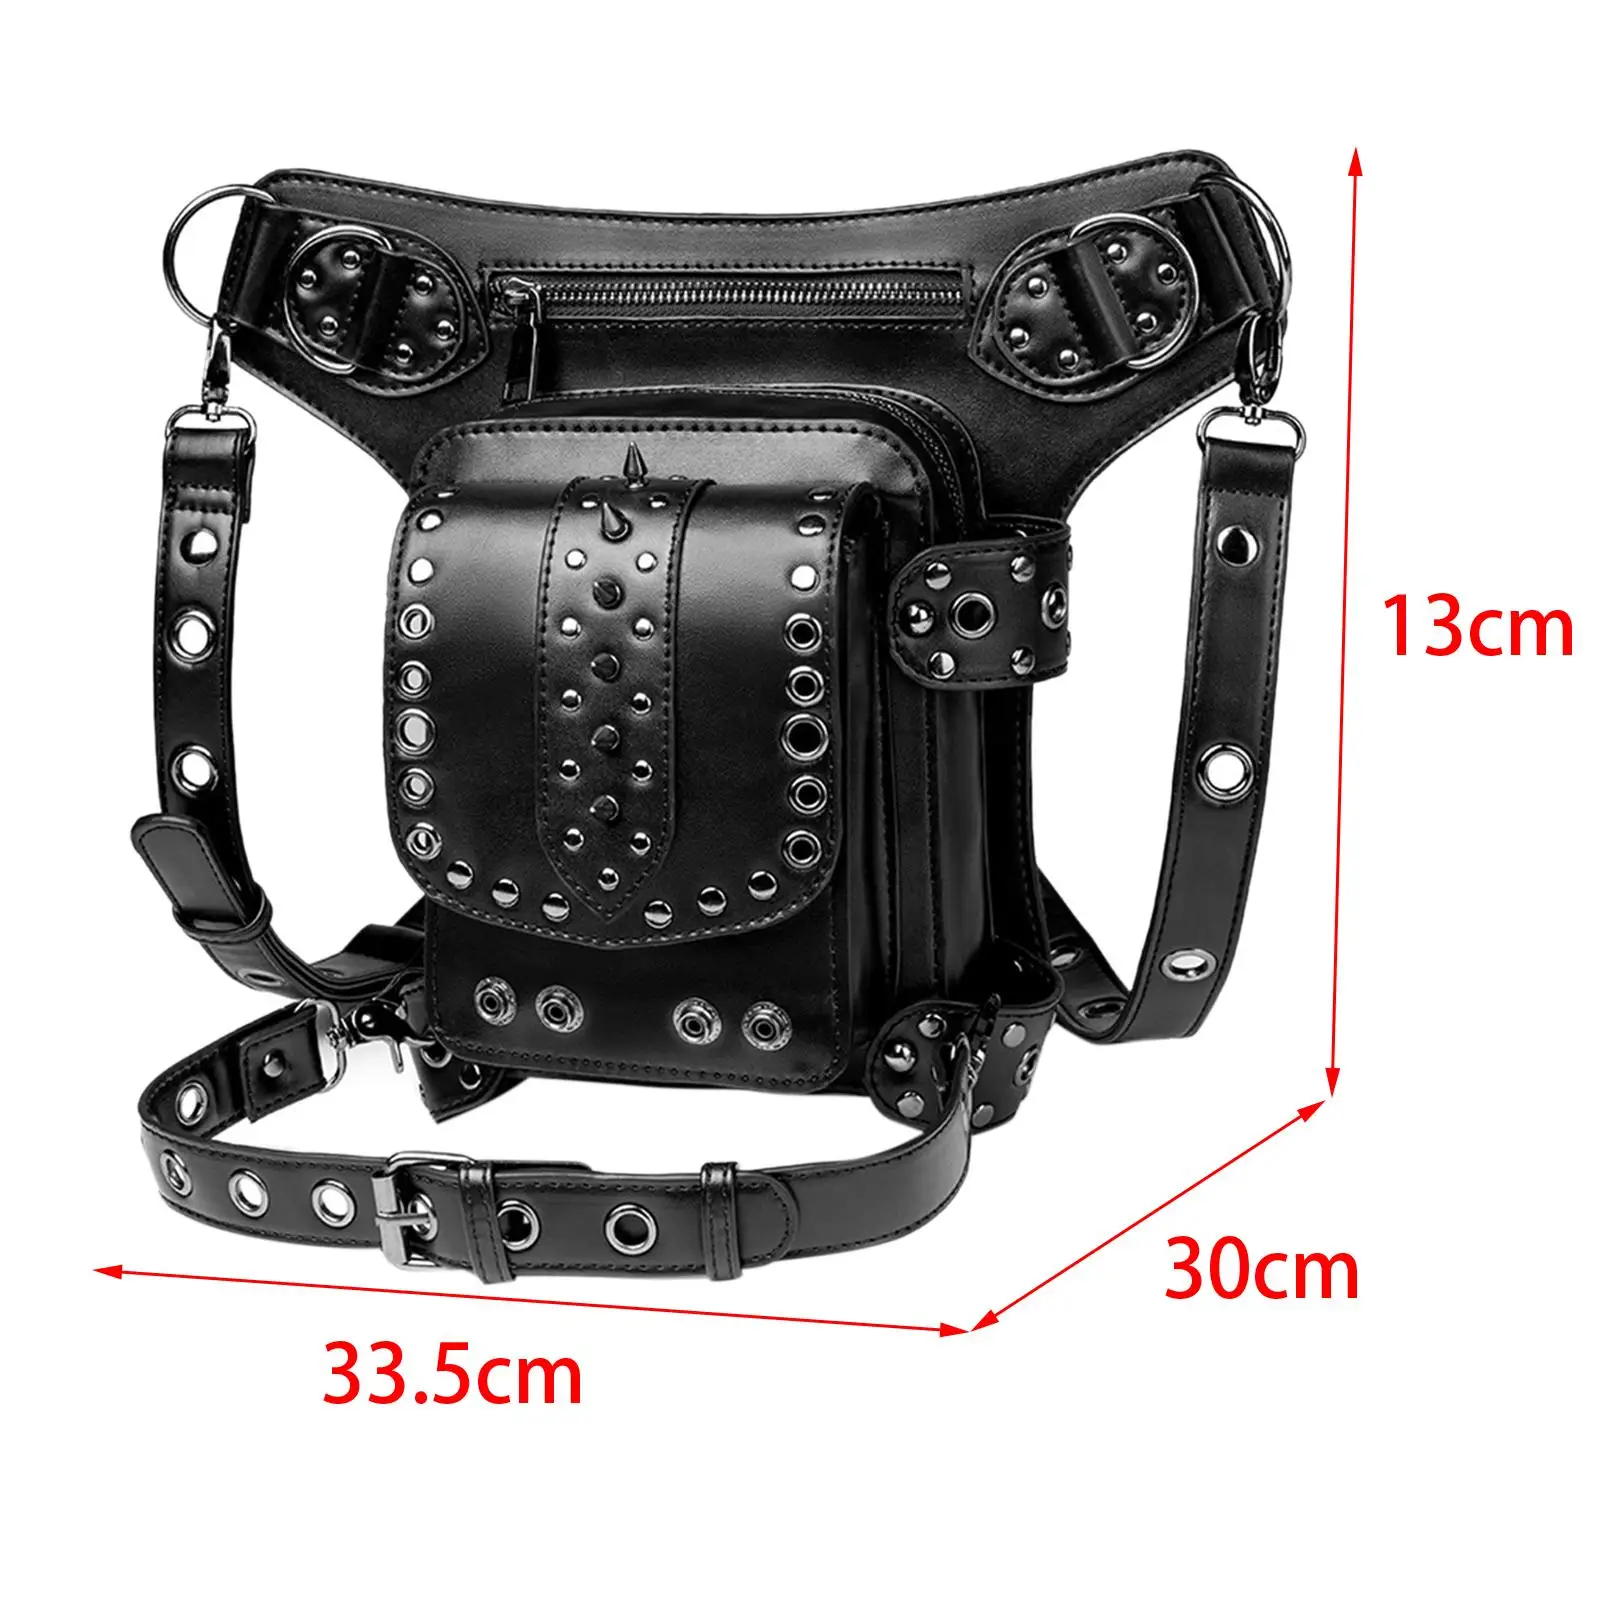 Steampunk Waist Bag with Detachable Strap Retro Style Waist Fanny Pack for Travel